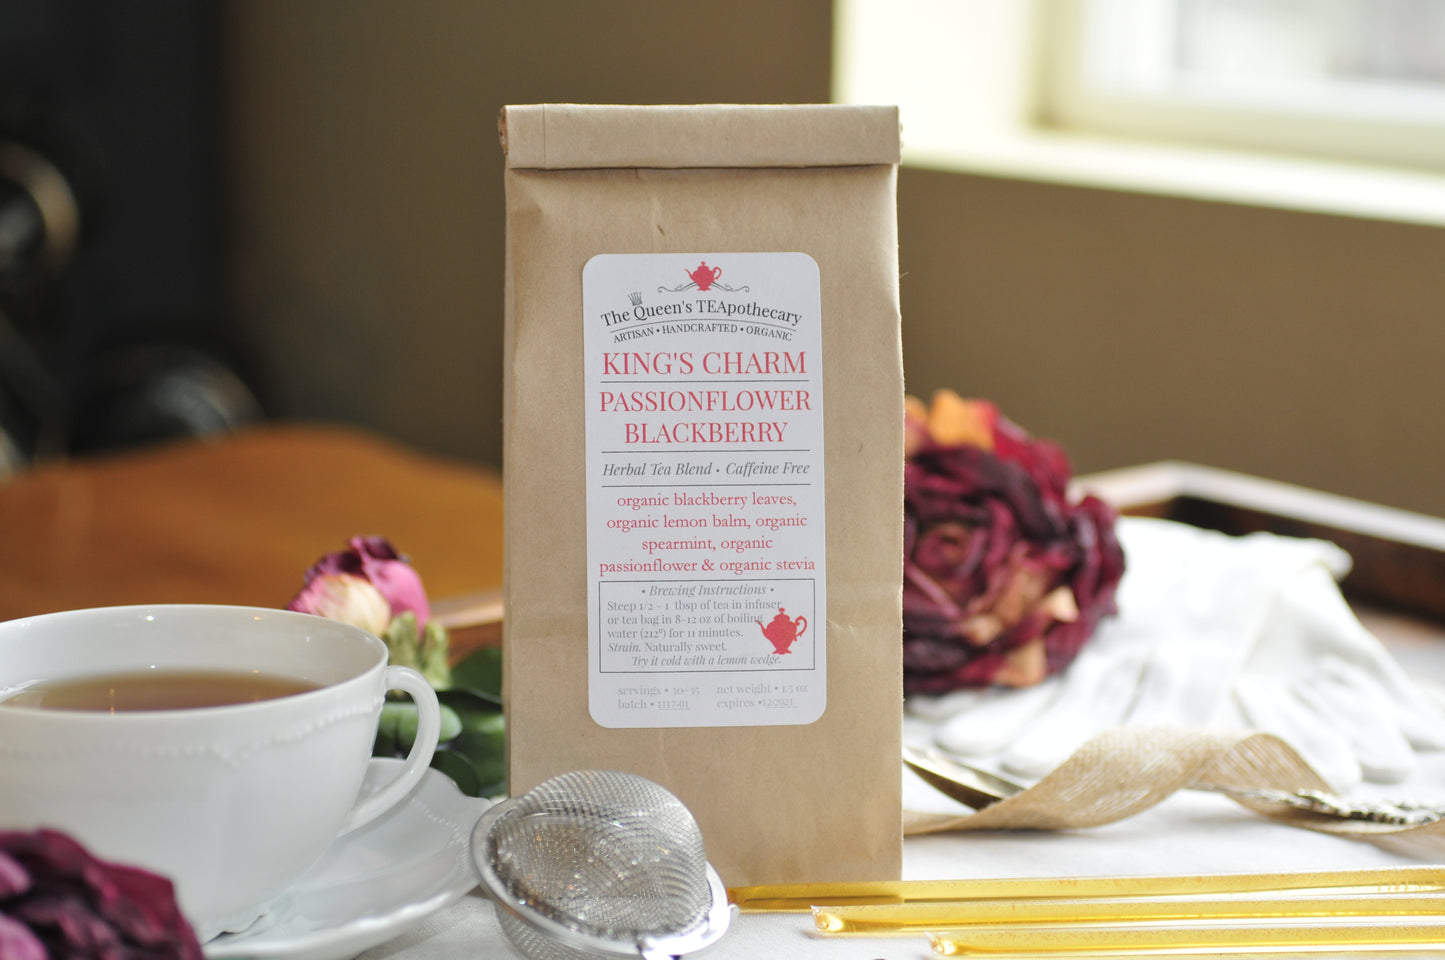 King's Charm herbal infusion | Passionflower & Blackberry